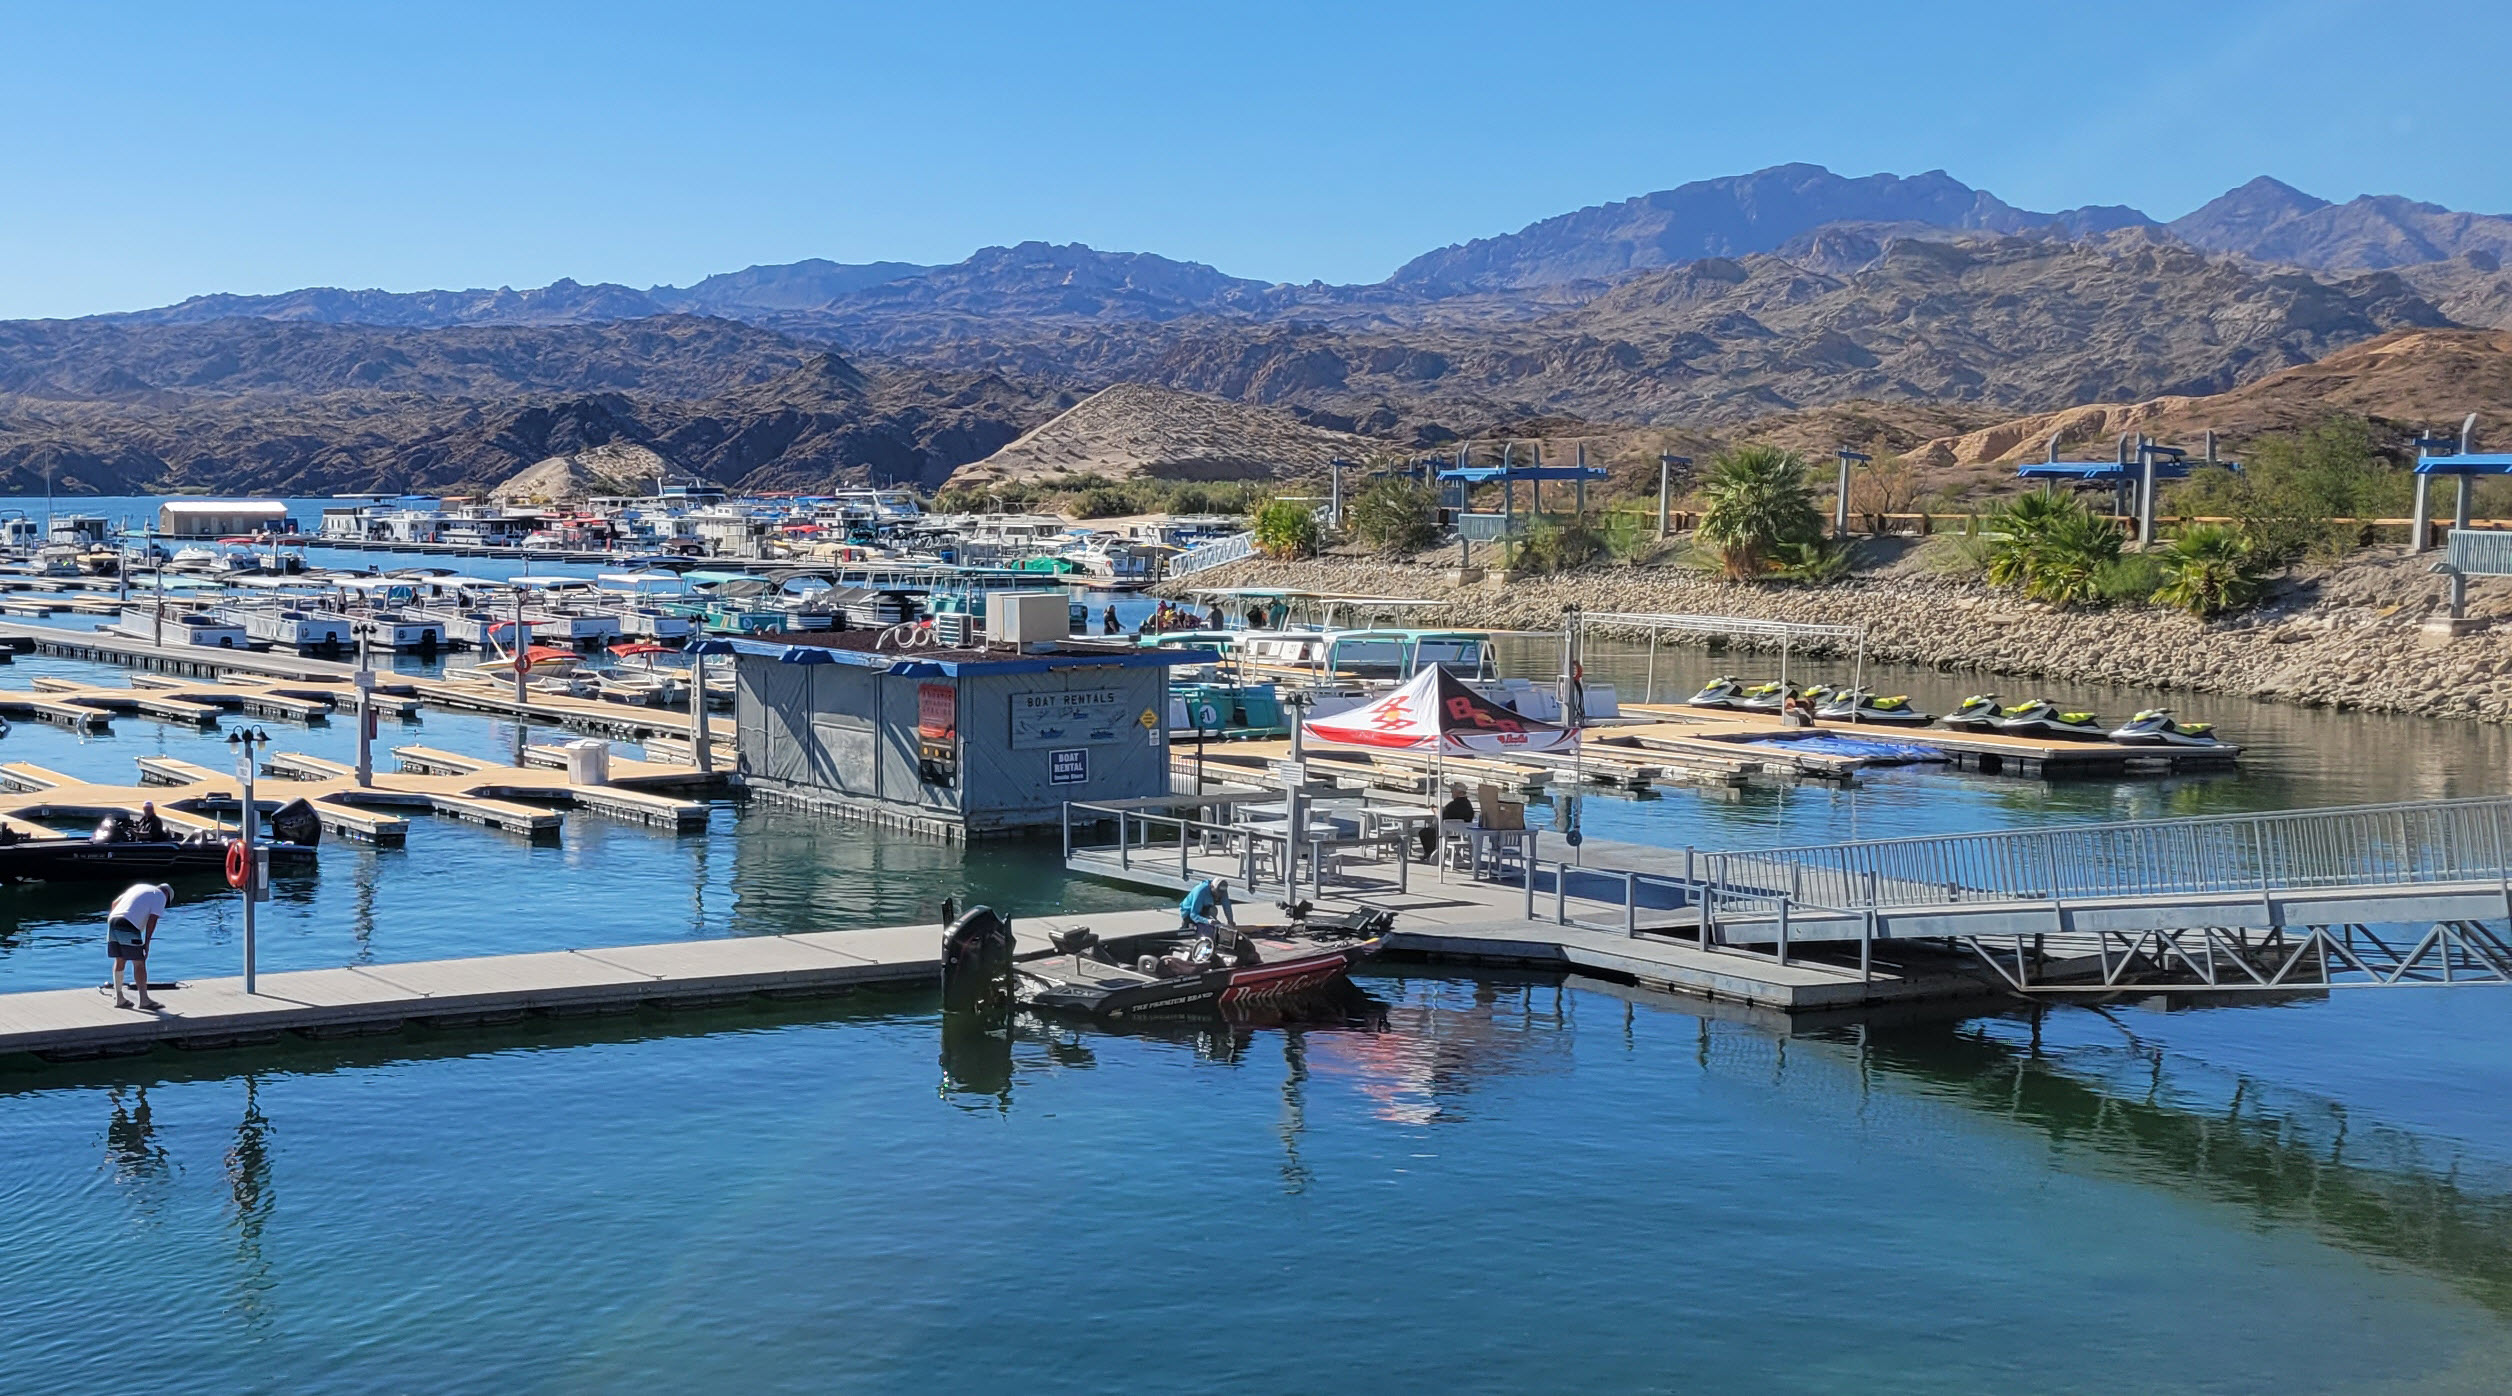 The 2023 WON Bass U.S. Open launches will be from Katherine Landing at Lake Mohave Marina.